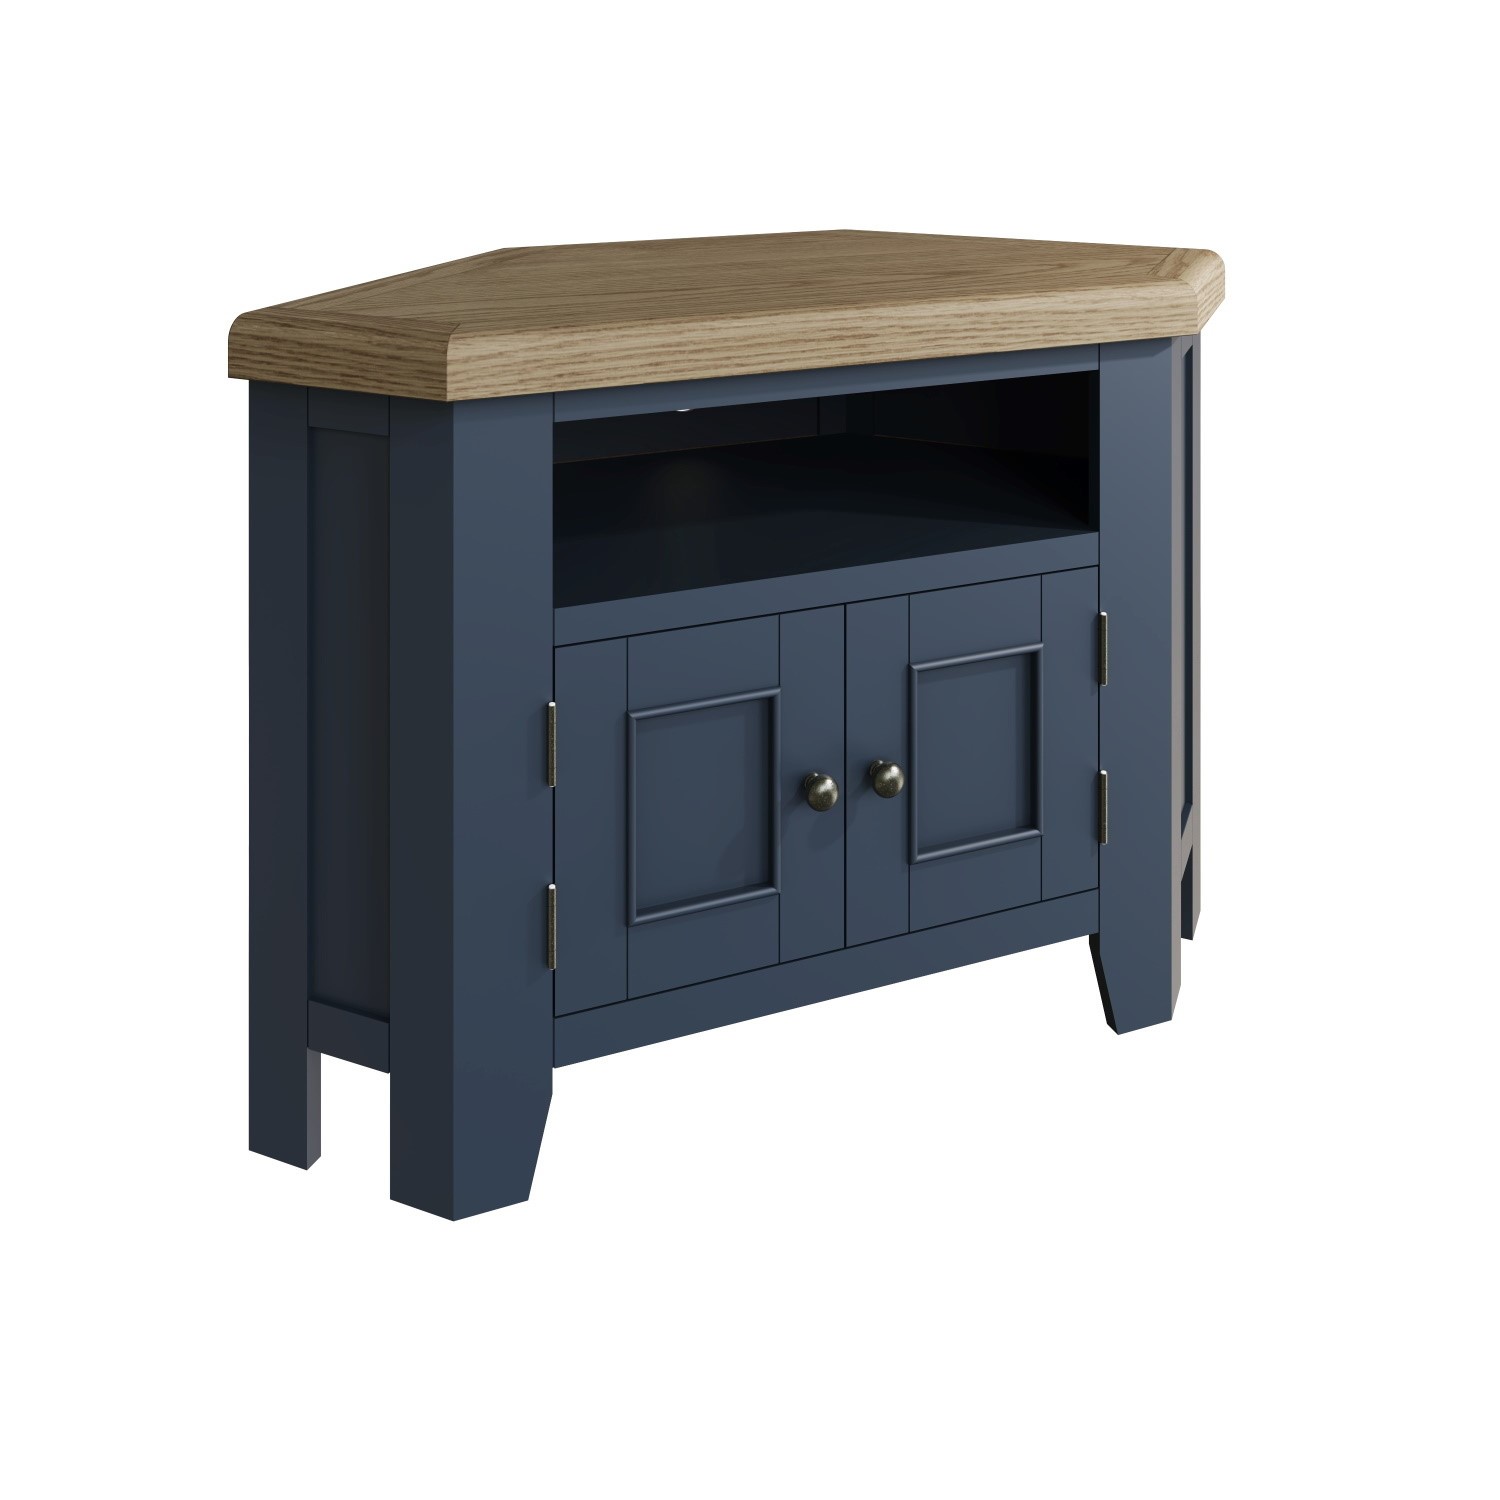 Read more about Navy solid oak corner tv stand with storage tvs up to 43 pegasus